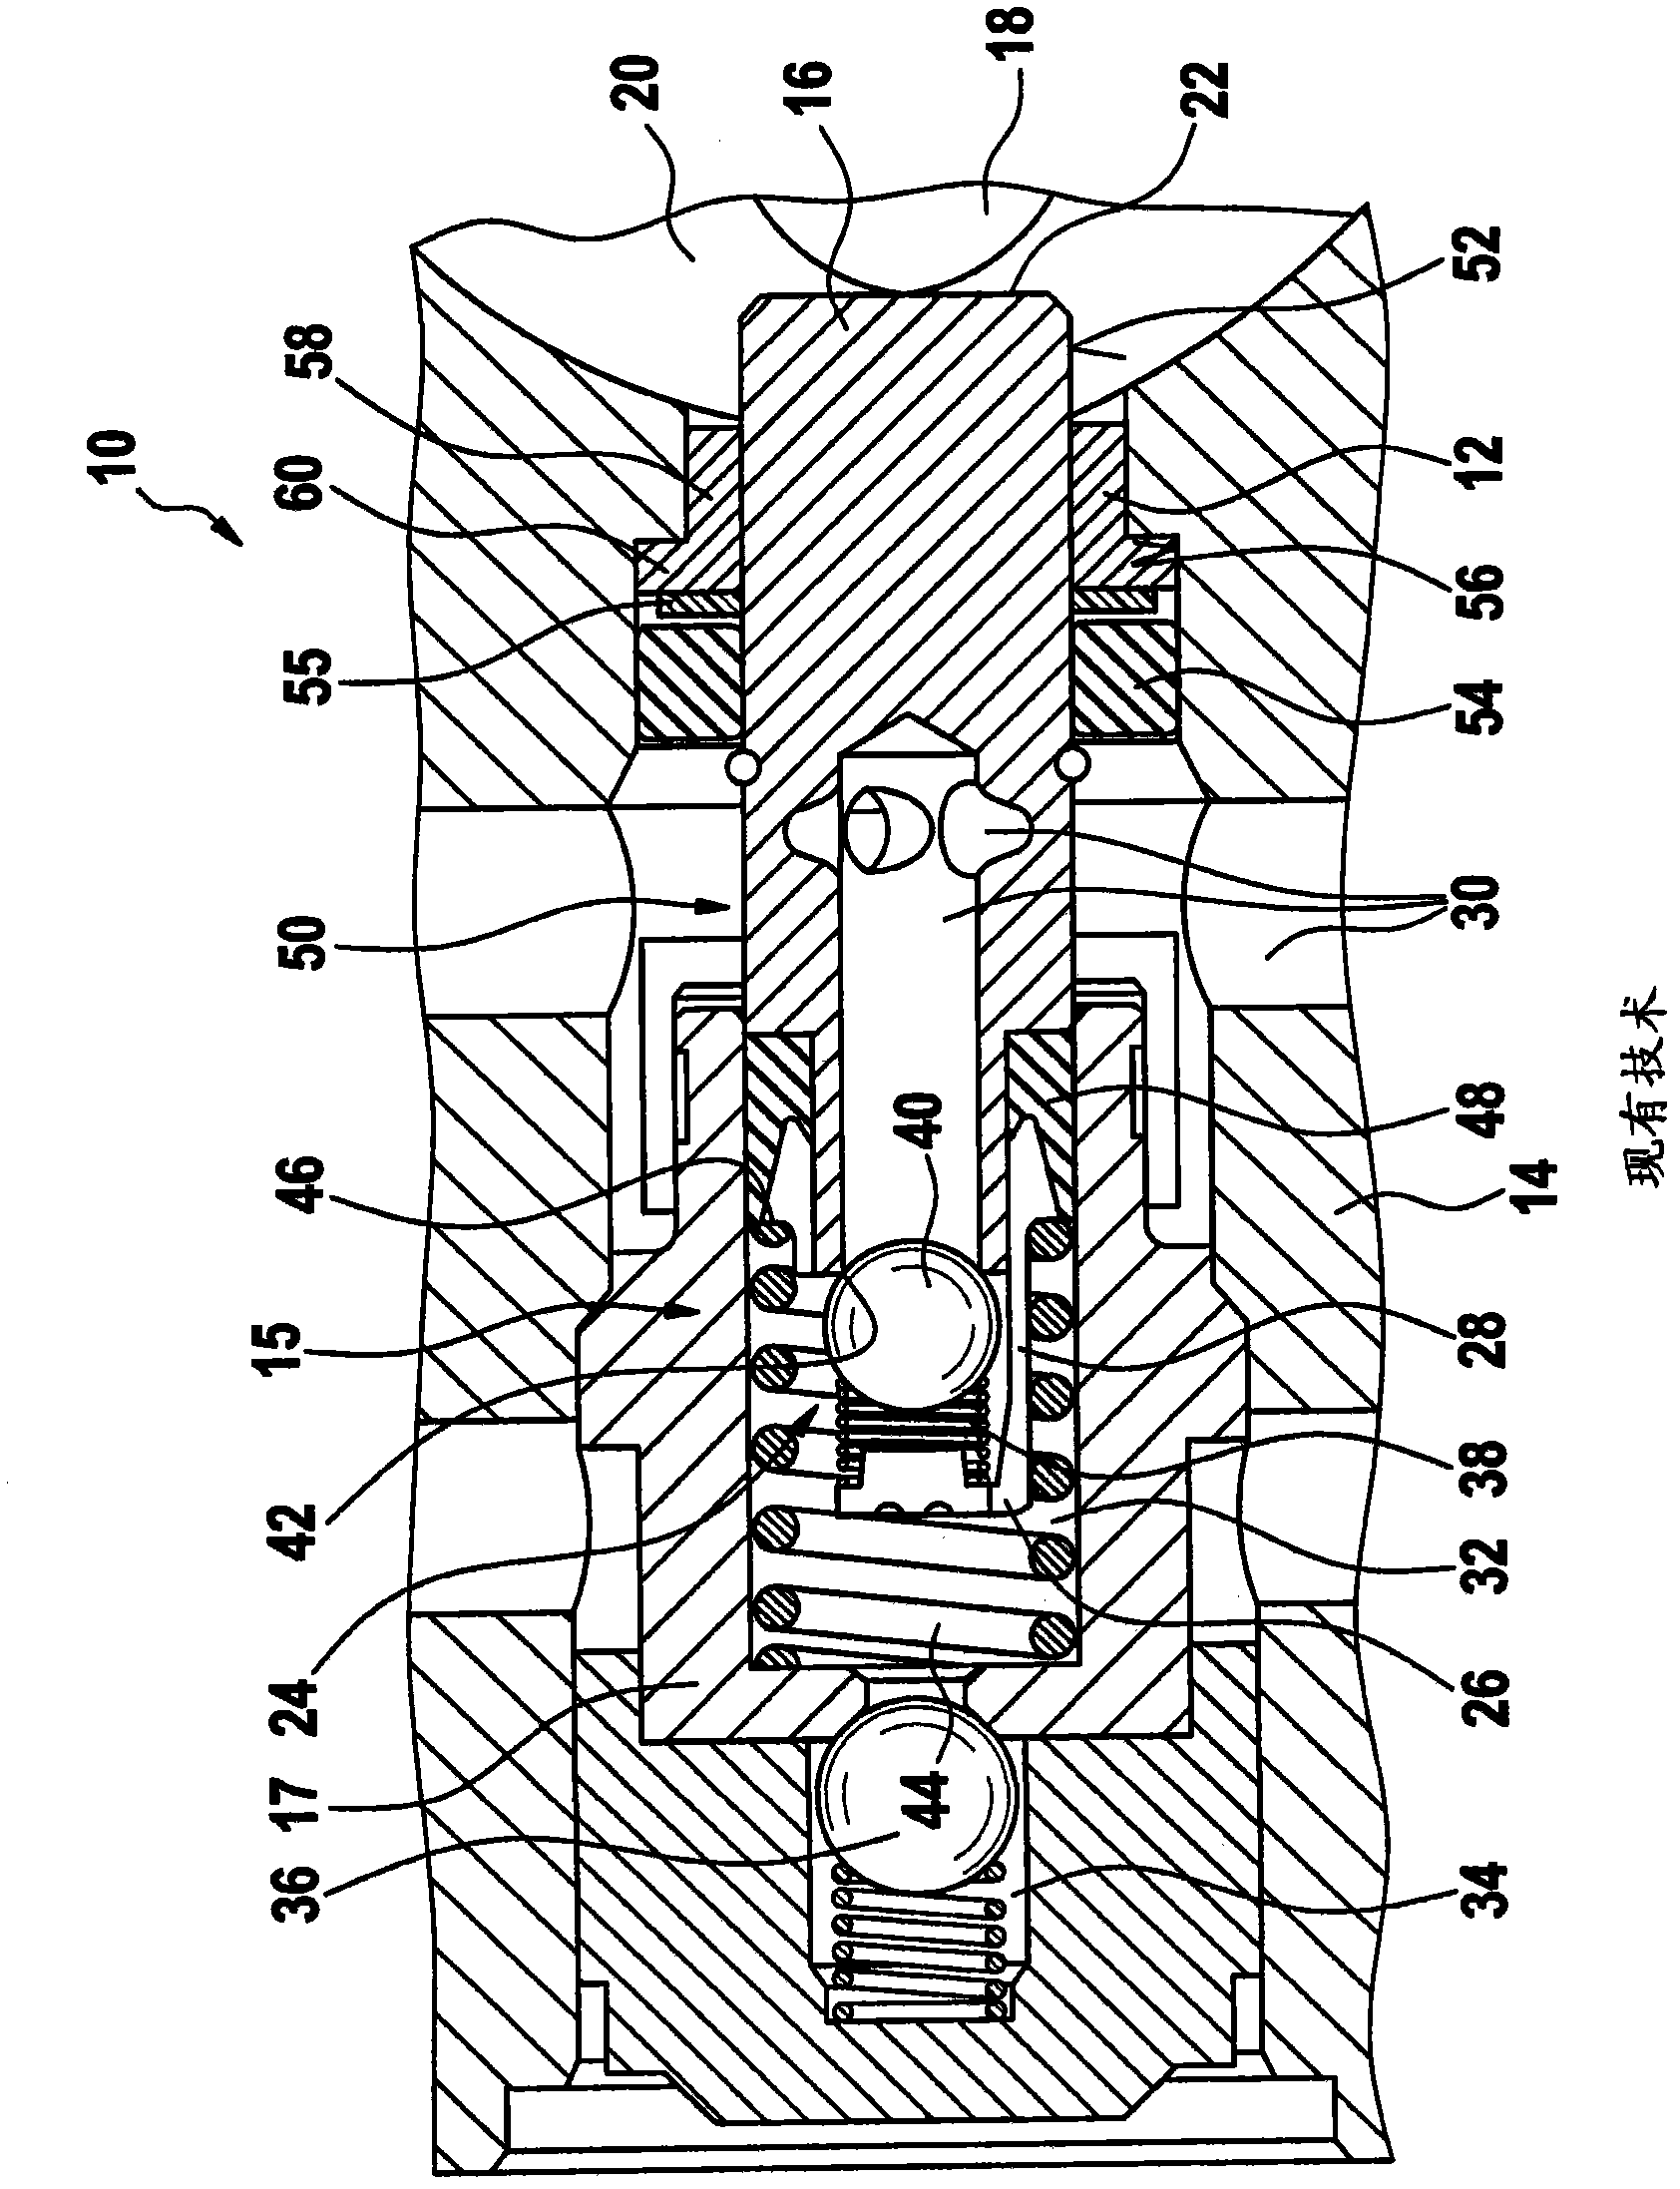 Piston guiding element, particularly piston guiding element for cylinder piston pump